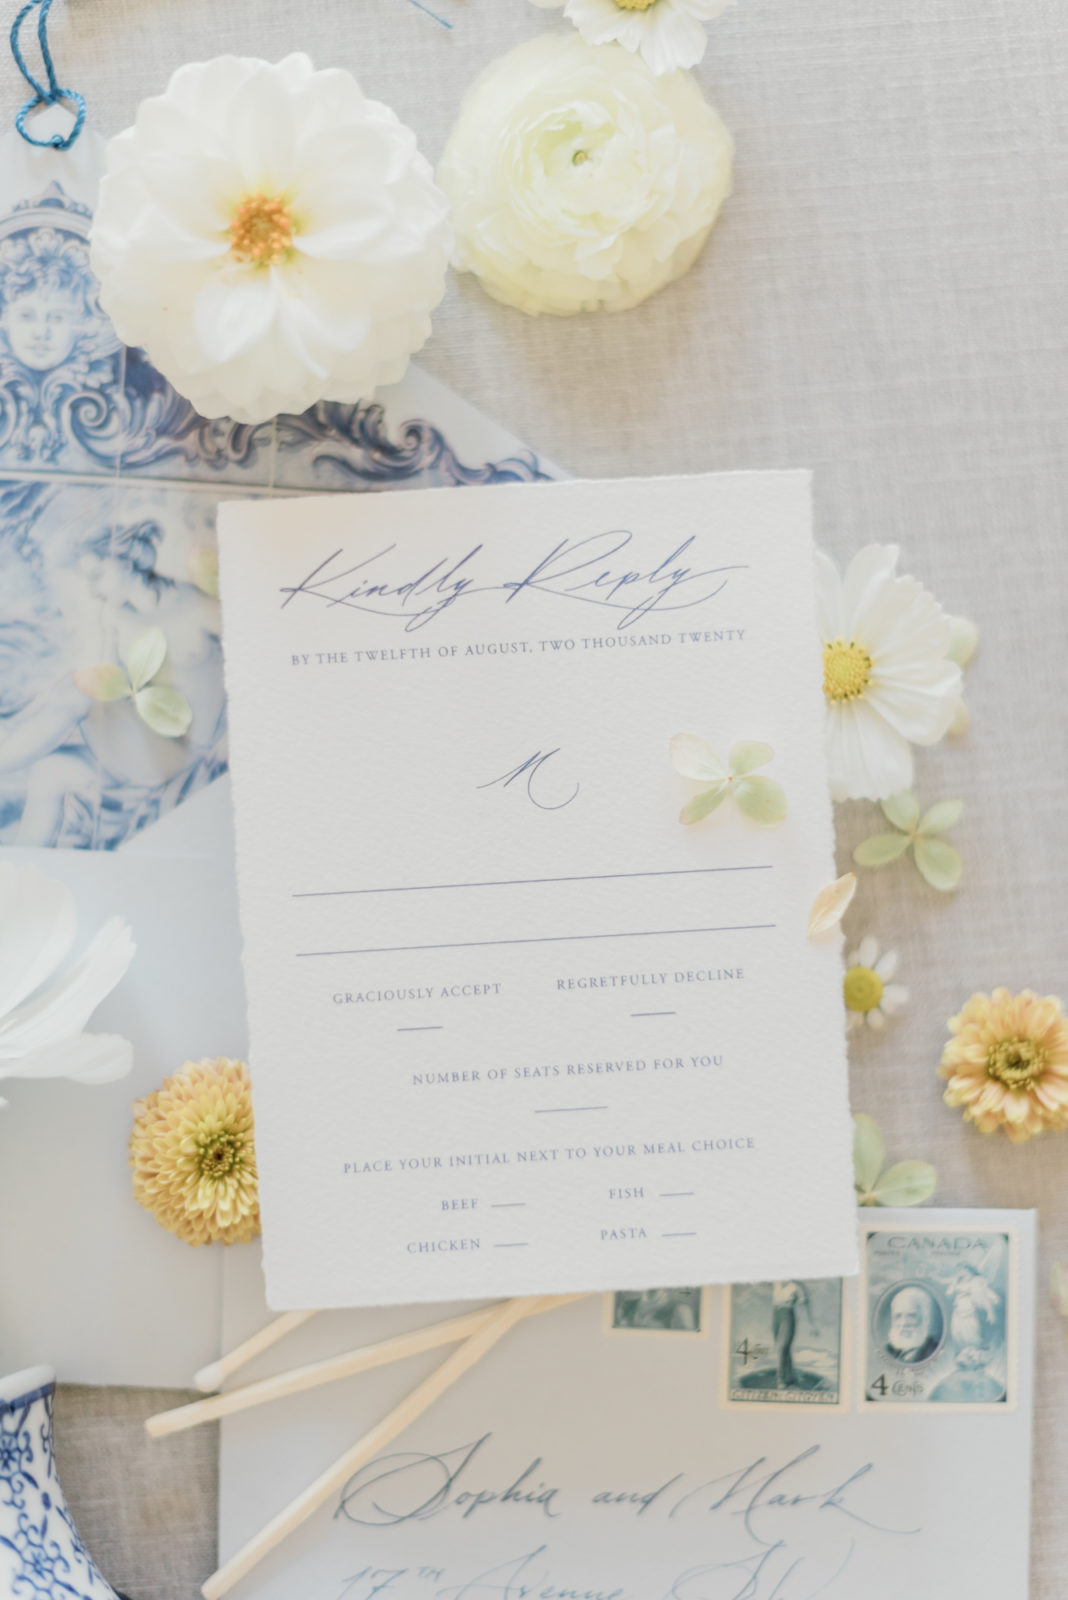 Portugal inspired wedding stationery, yellow accents, blue wedding